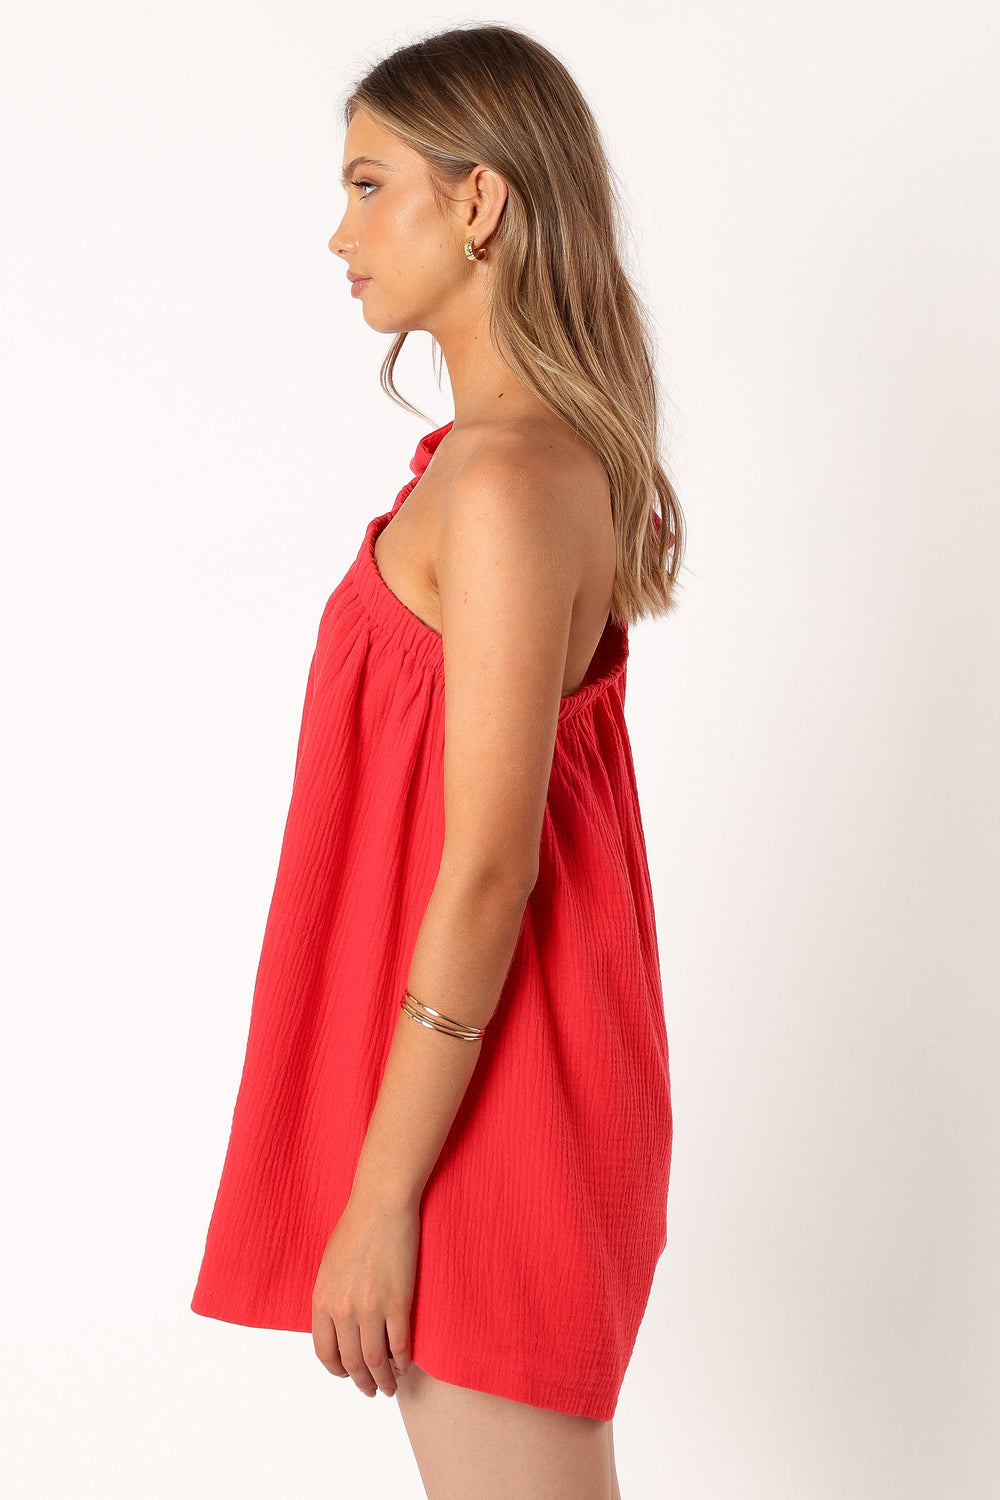 PLAYSUITS @Miffy One Shoulder Playsuit - Red